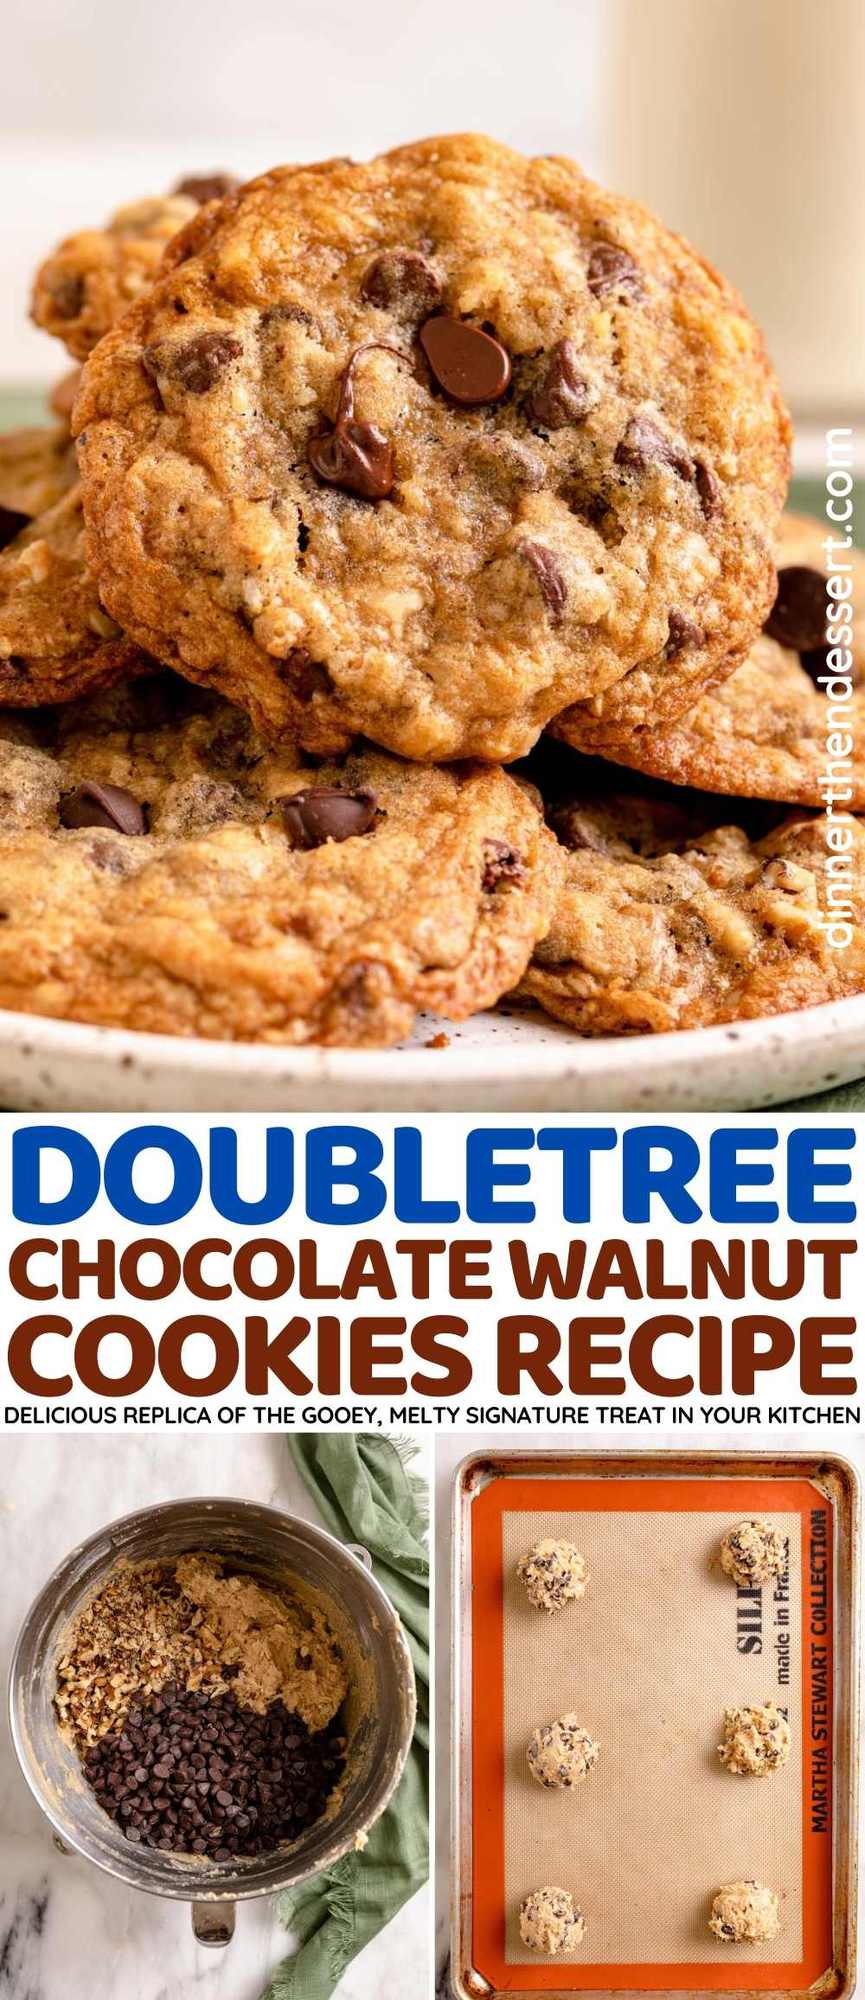 Doubletree Chocolate Walnut Cookies collage